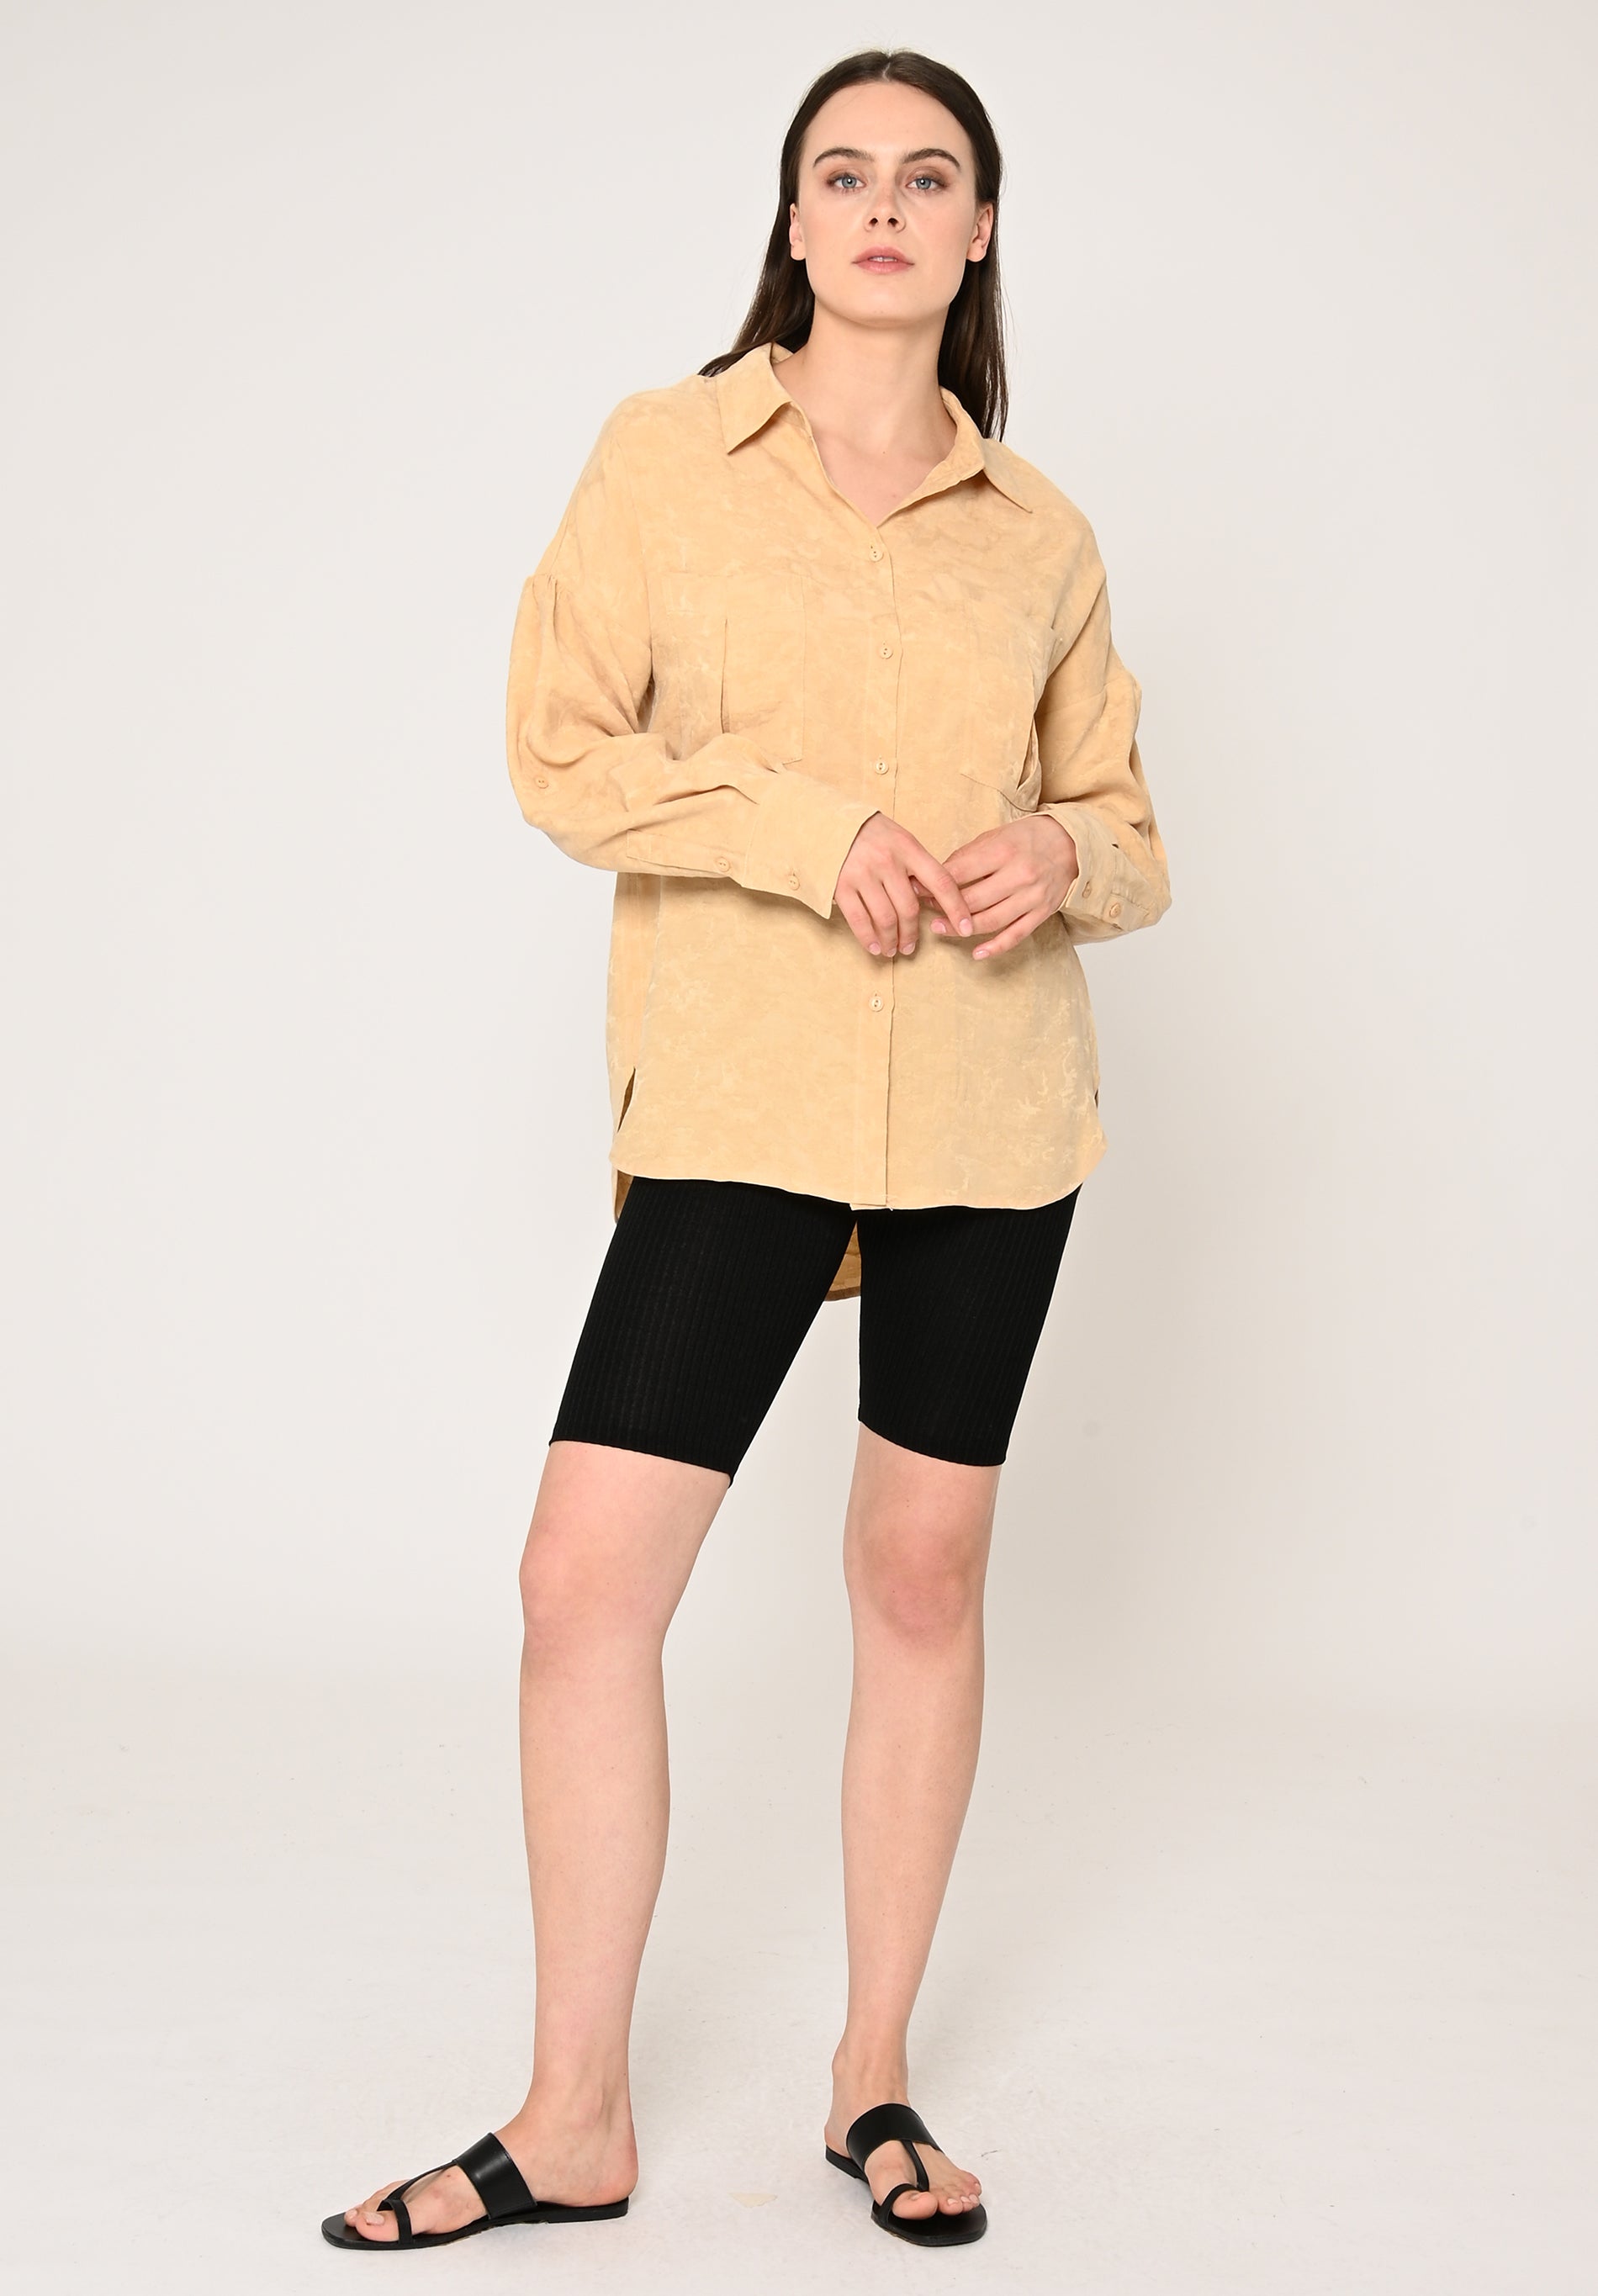 Blouse MANTARI MOIRE in cream yellow by LOVJOI made of TENCEL™